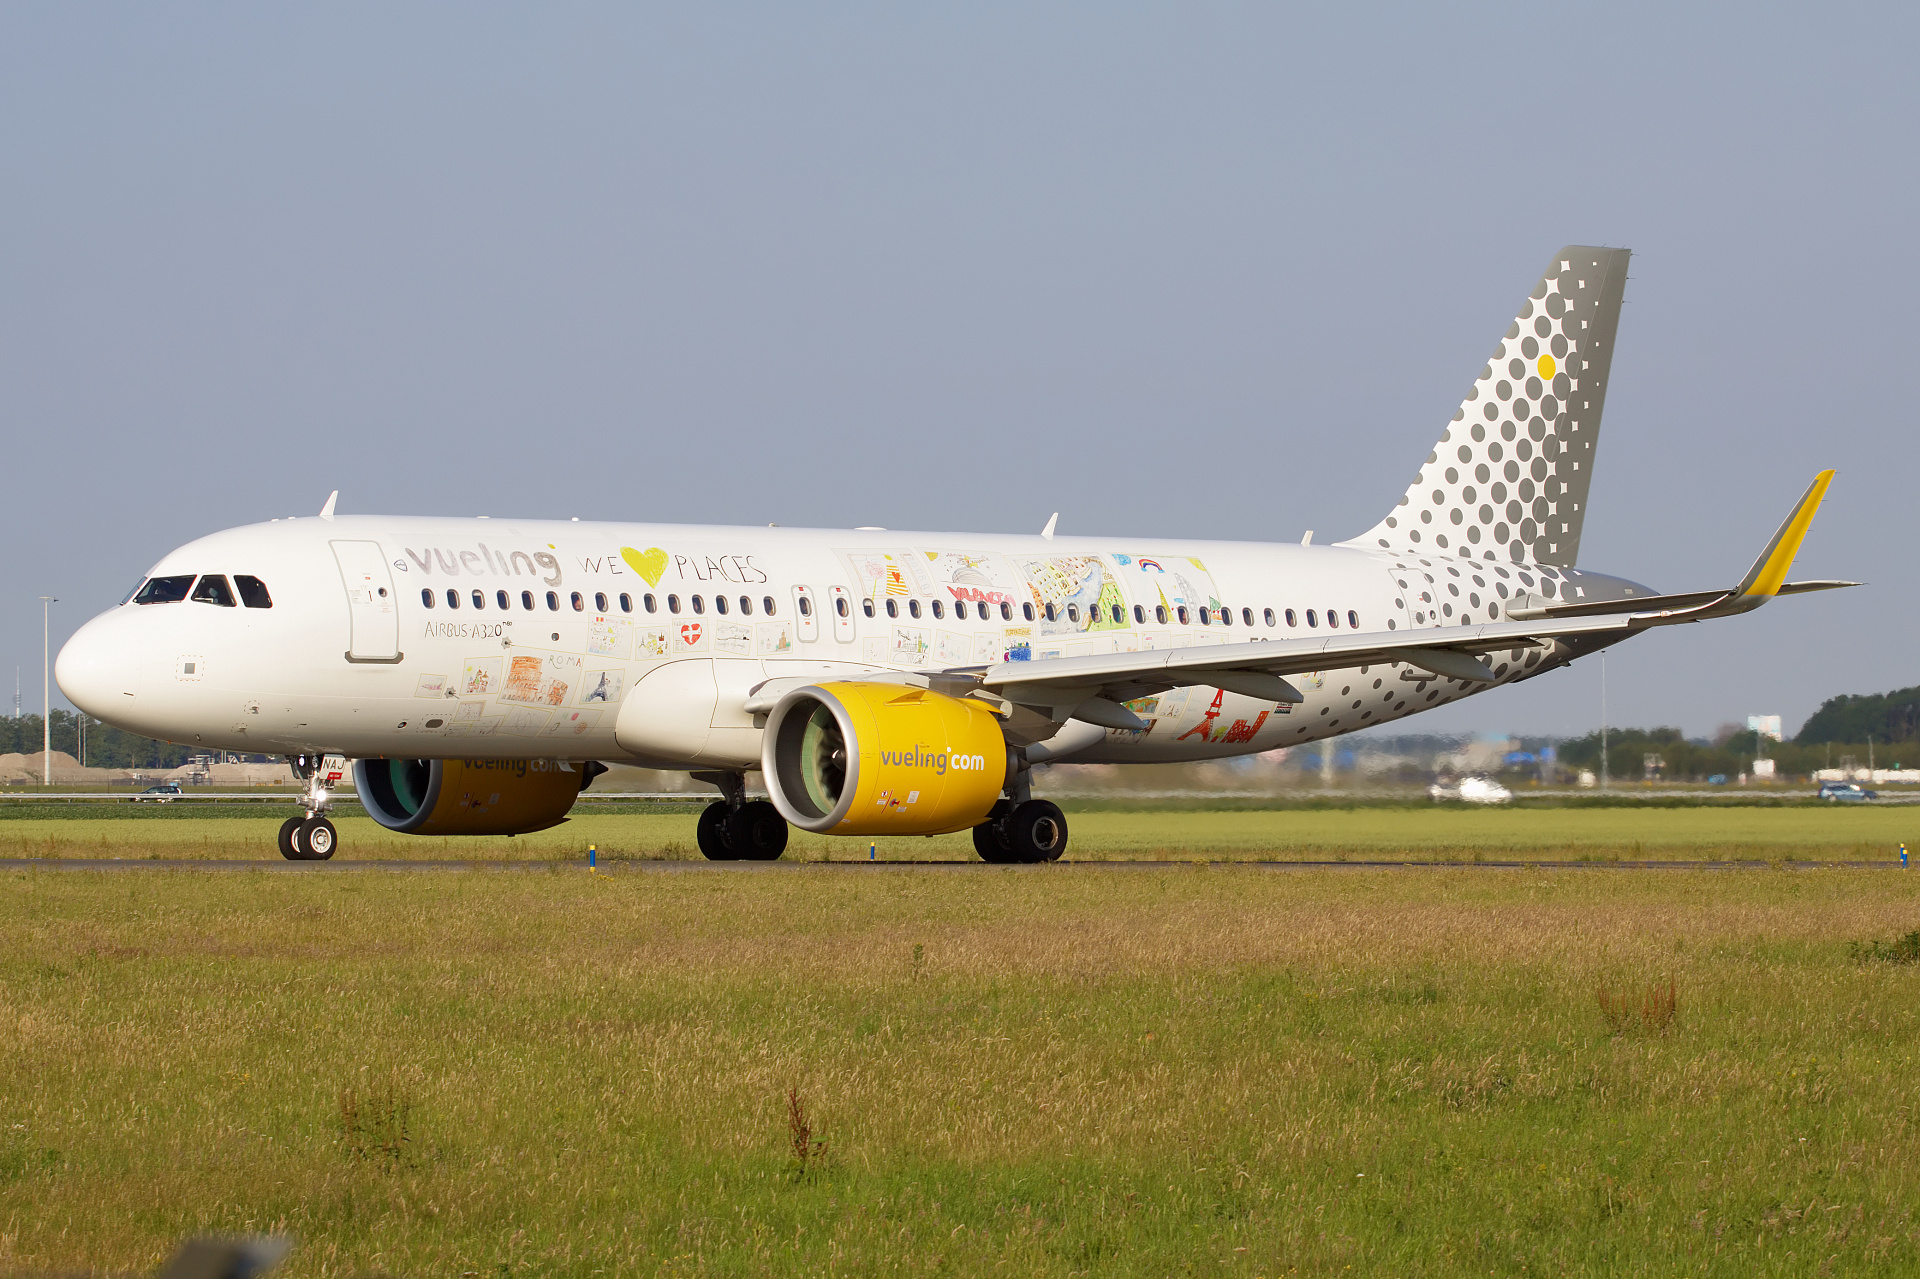 EC-NAJ (malowanie We Love Places) (Samoloty » Spotting na Schiphol » Airbus A320neo » Vueling Airlines)